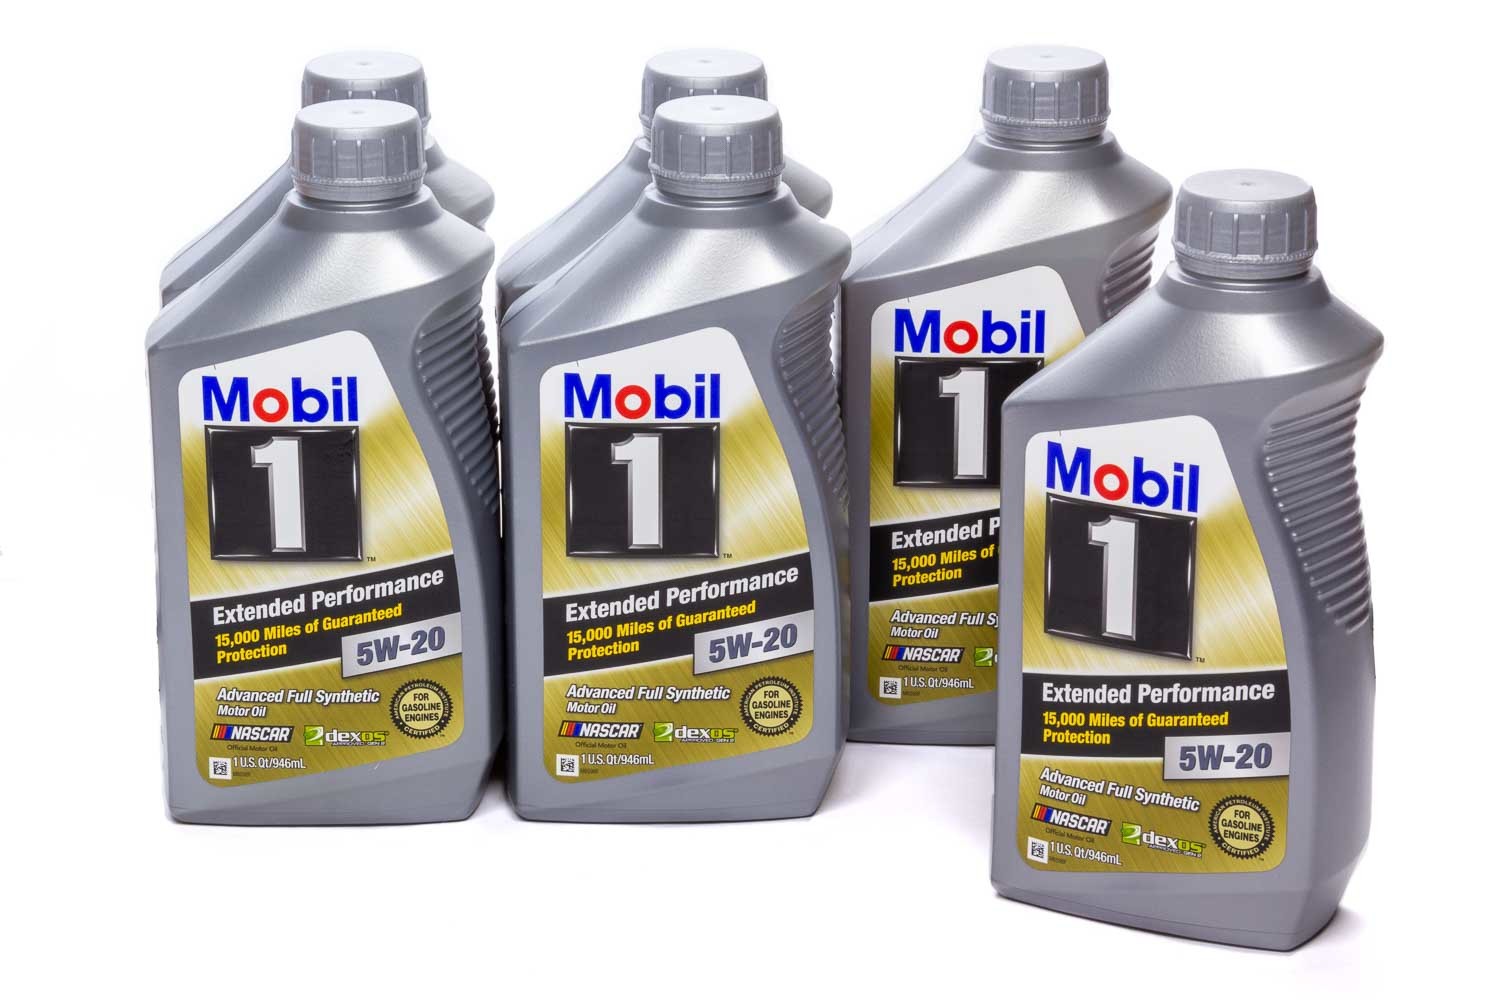 Масло мобил 0w20. Mobil 1 Extended Performance 5w-20. Mobil Full Synthetic 5w-20. Mobil1 Extended Performance 5w-30. Mobil 1 dexos1.